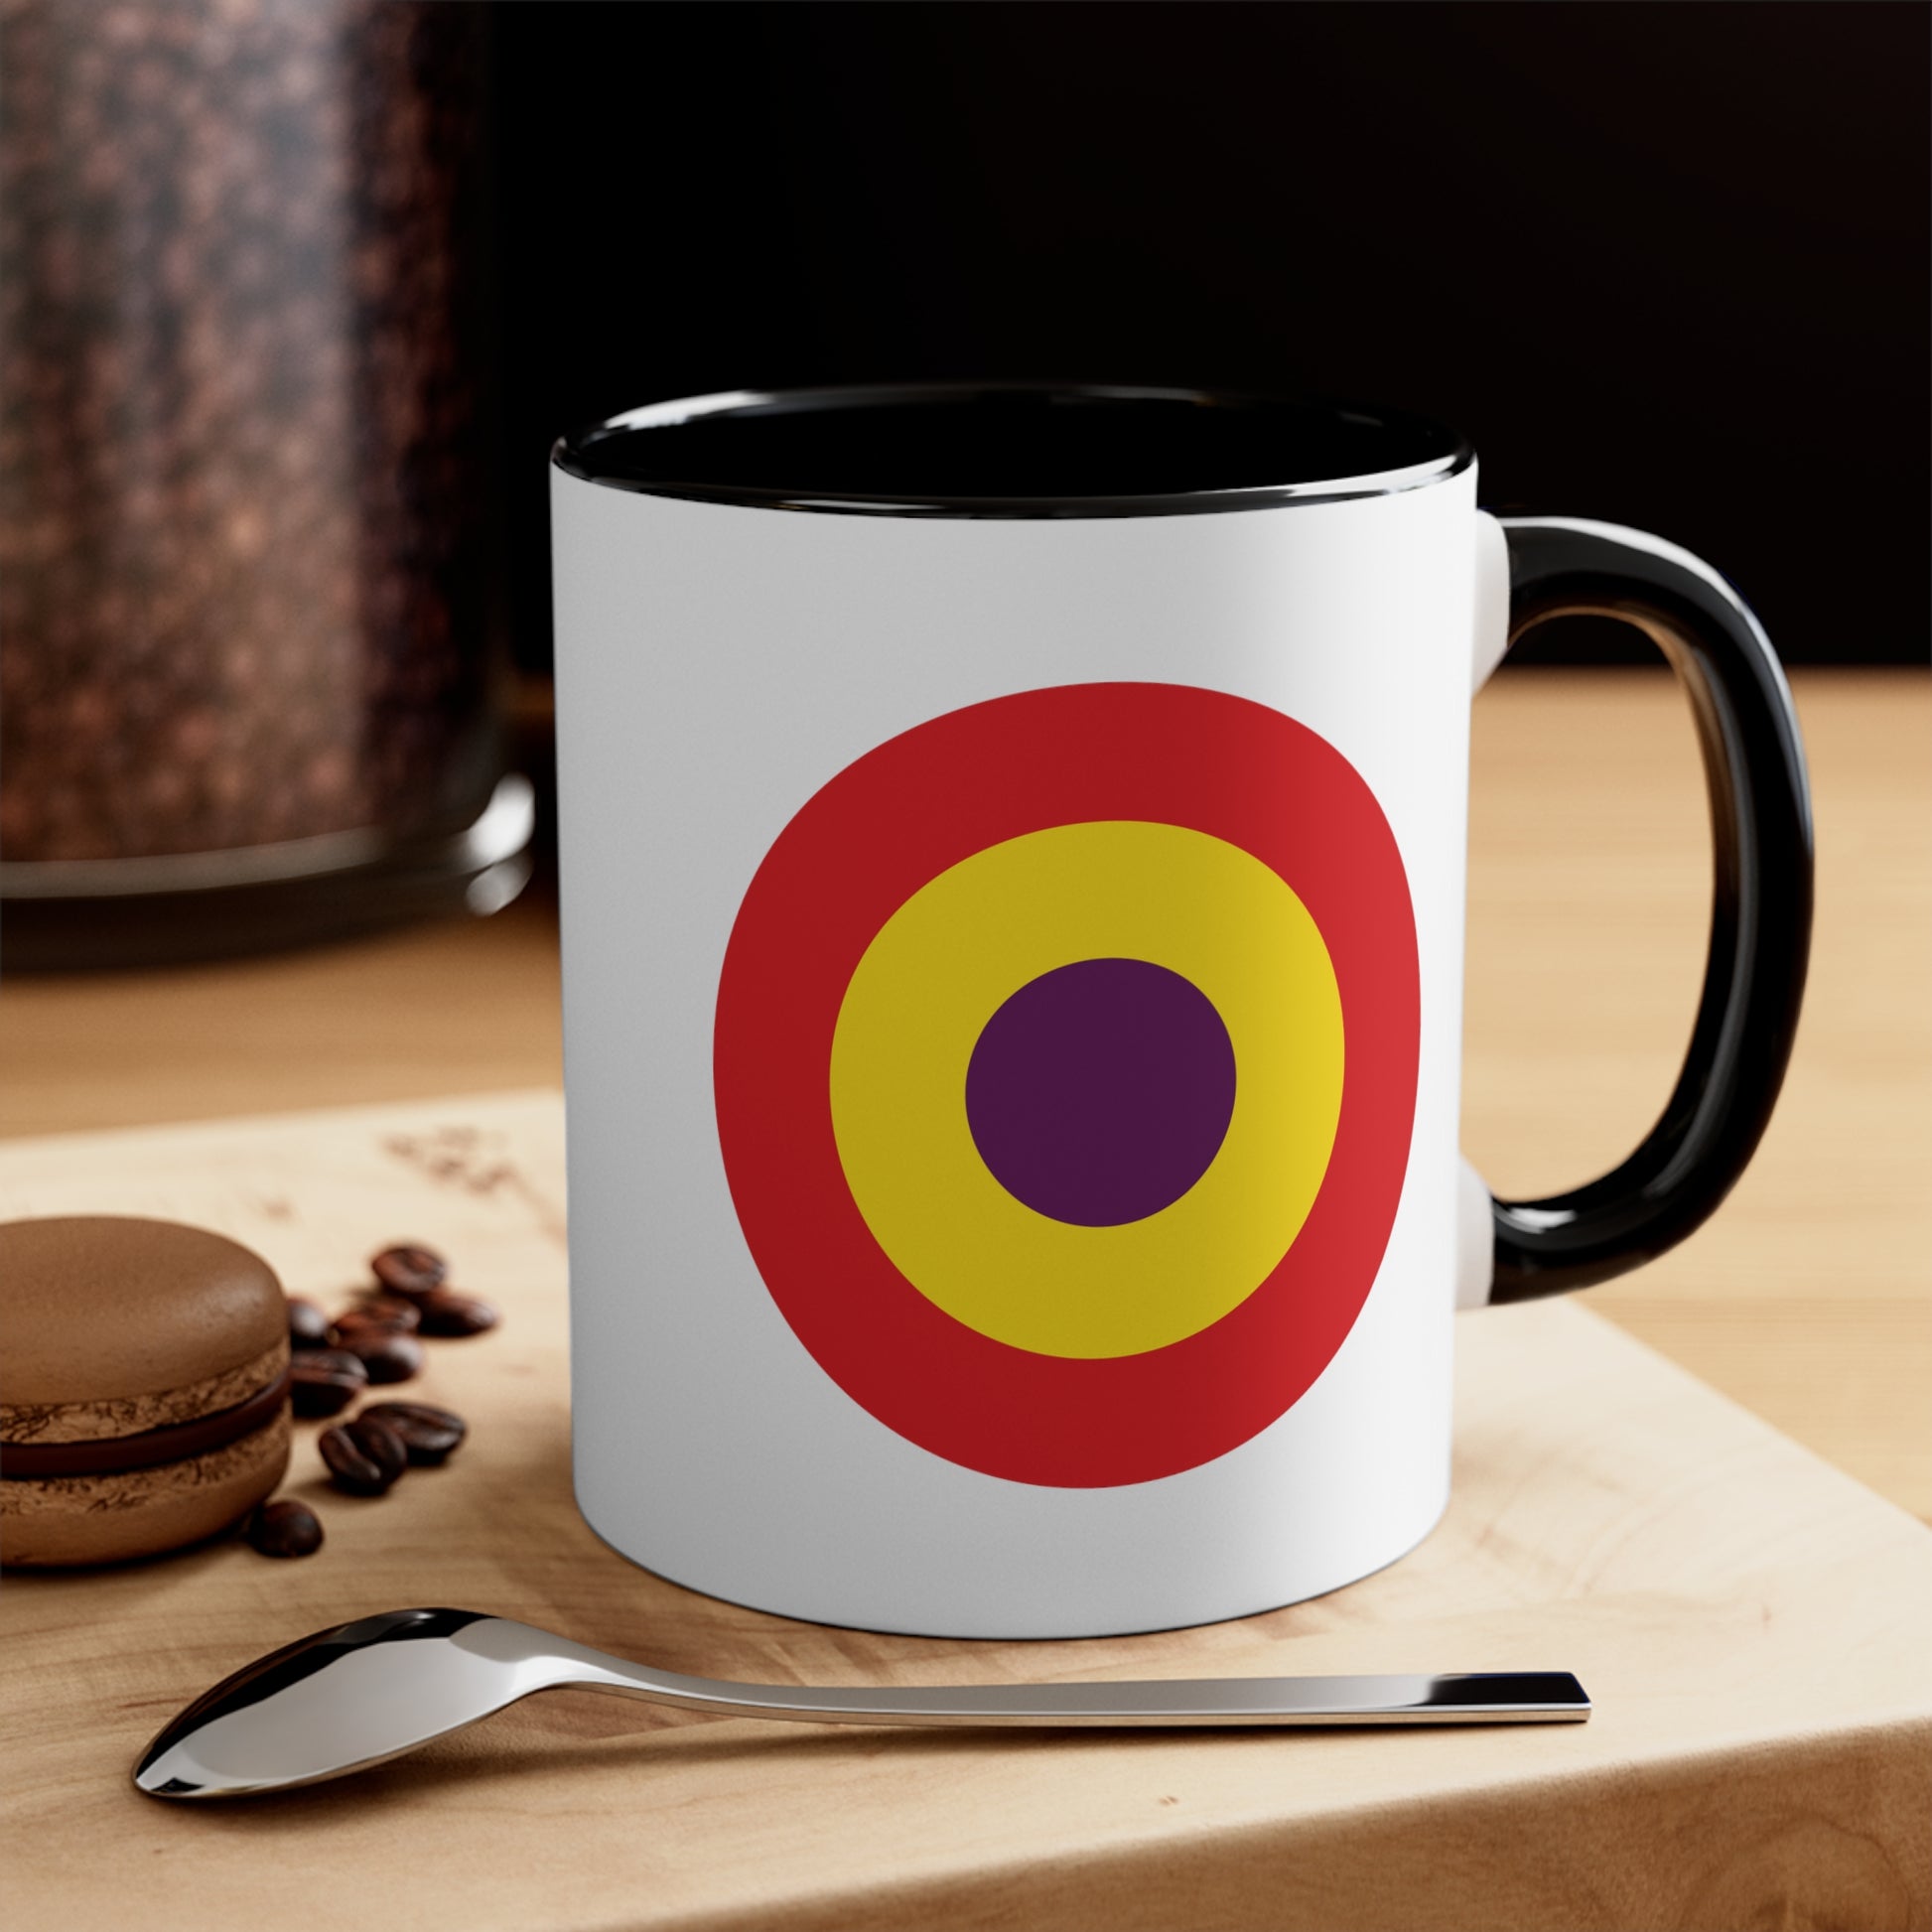 Spanish Air Force Roundel Coffee Mug - Double Sided Black Accent Ceramic 11oz - by TheGlassyLass.com